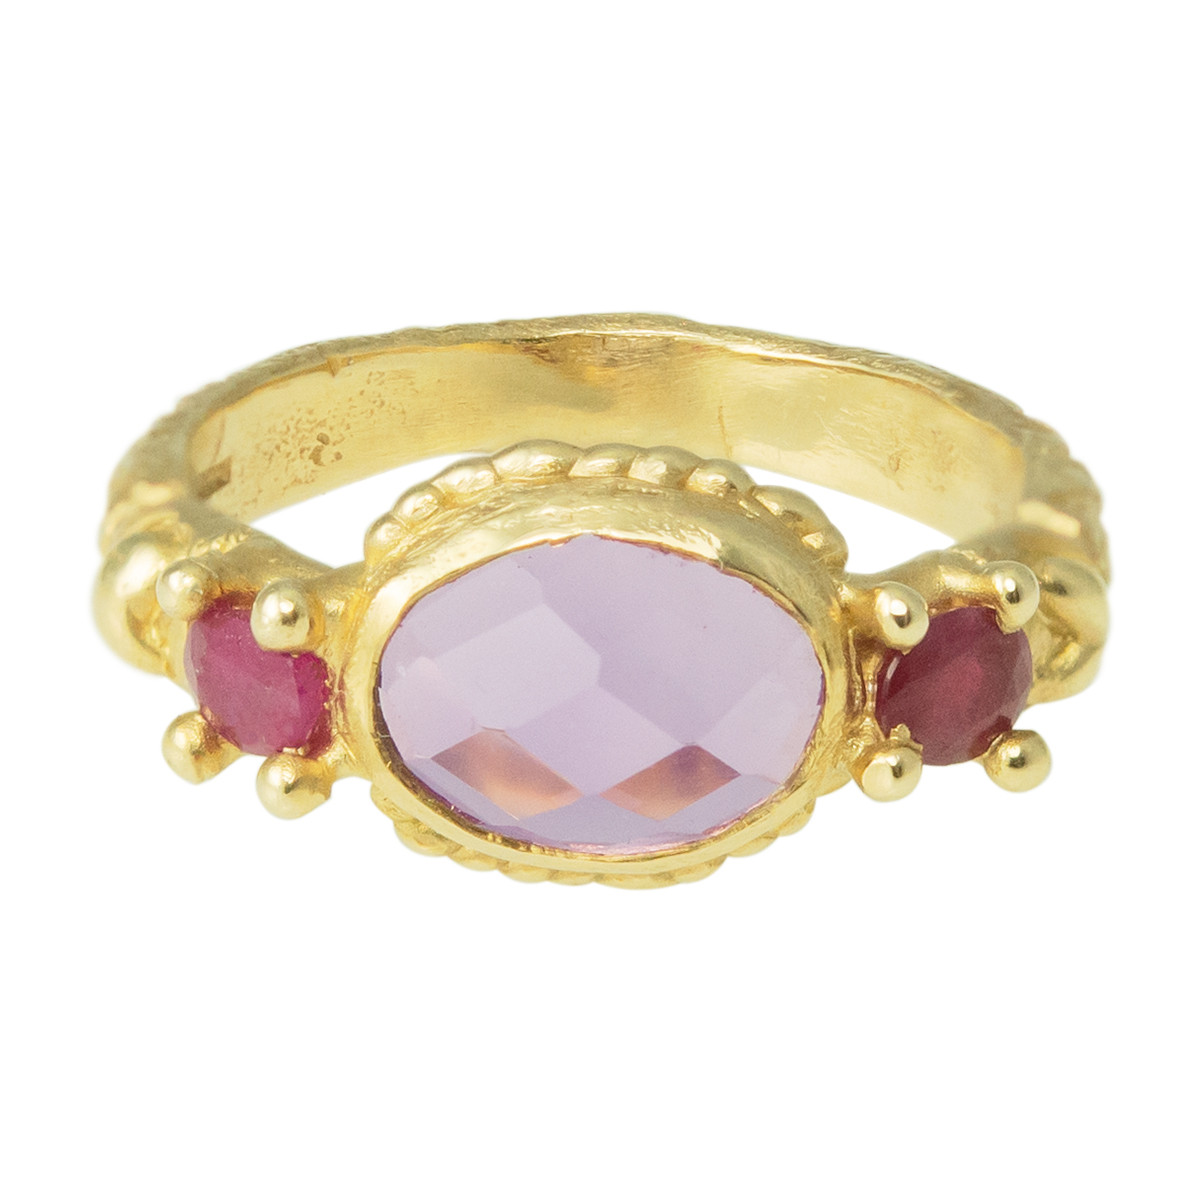 OOAK Amethyst & Ruby Trilogy Ring in 9ct Gold by Ciara Bowles available at tomfoolery London | www.tomfoolerylondon.co.uk